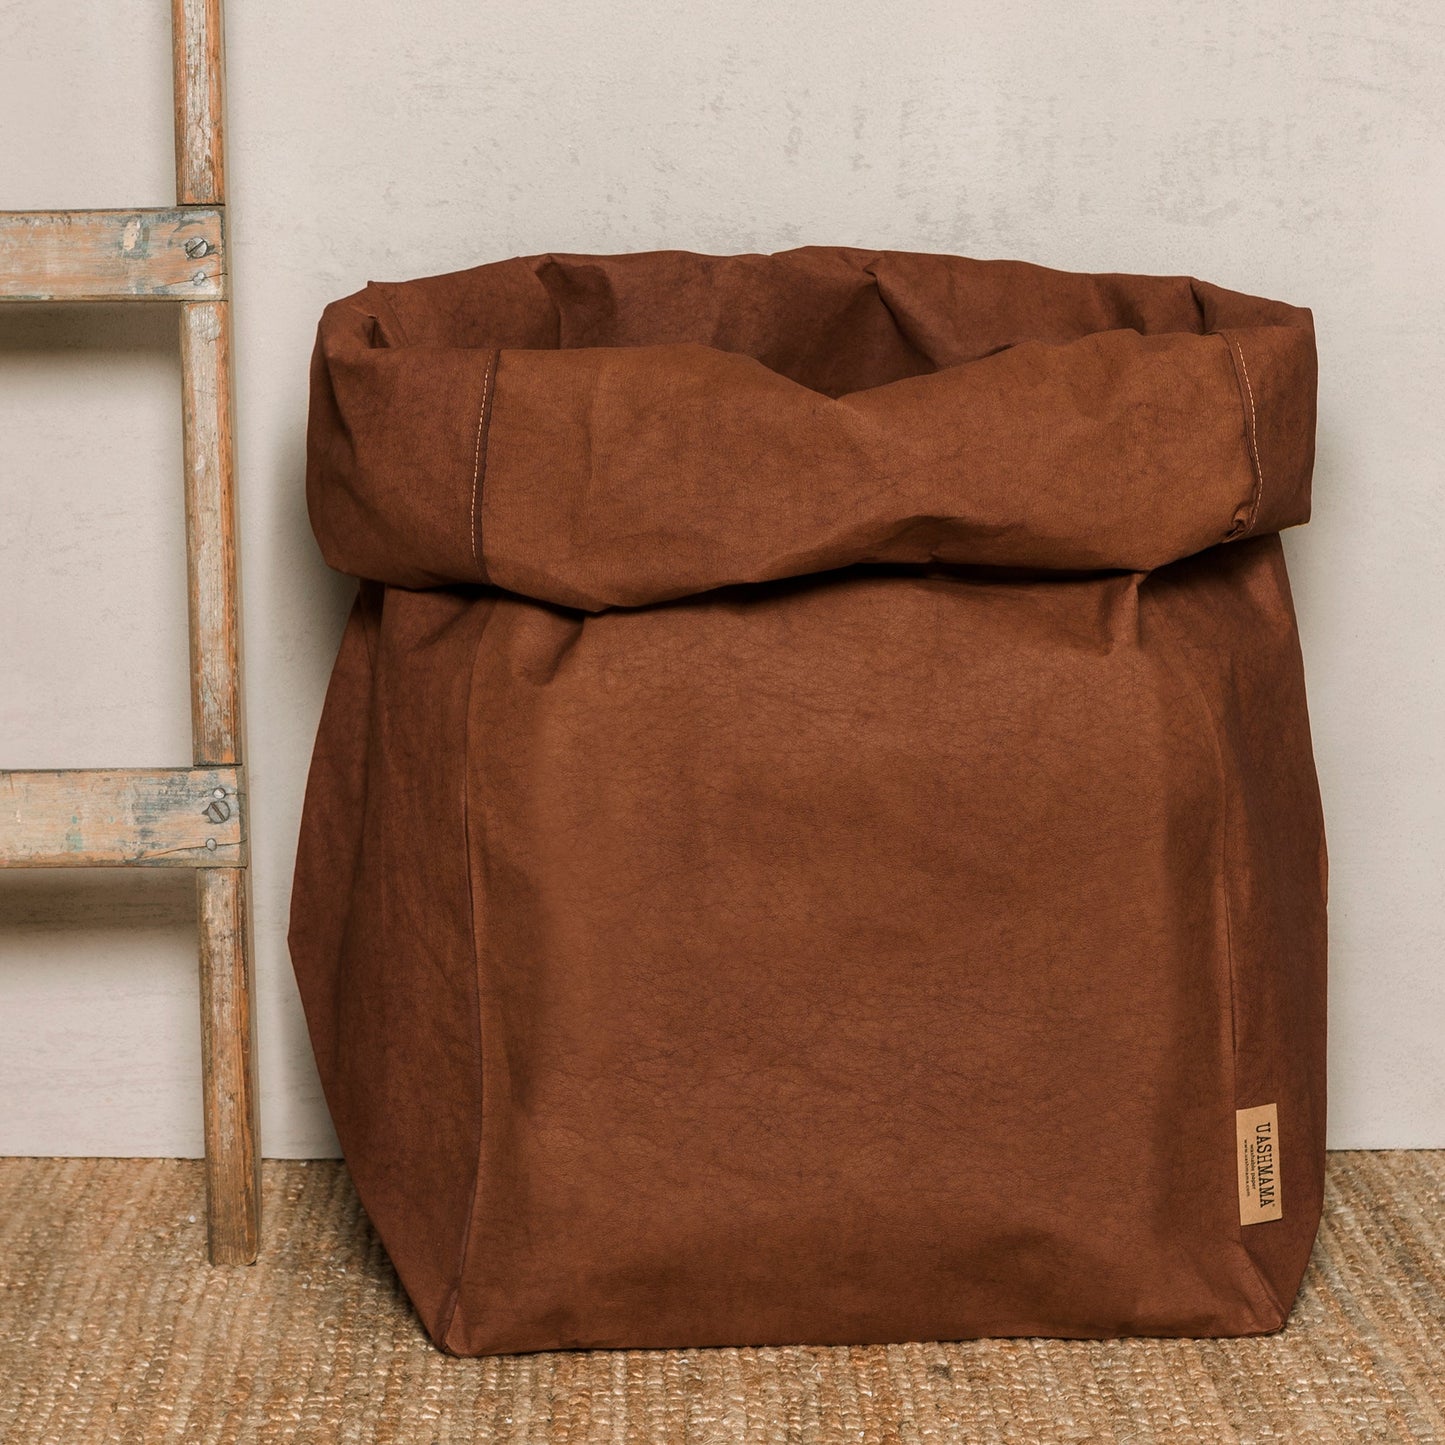 A washable paper bag is shown. The bag is rolled down at the top and features a UASHMAMA logo label on the bottom left corner. The bag pictured is the gigantic size in brown. Next to the paper bag is a wooden ladder.